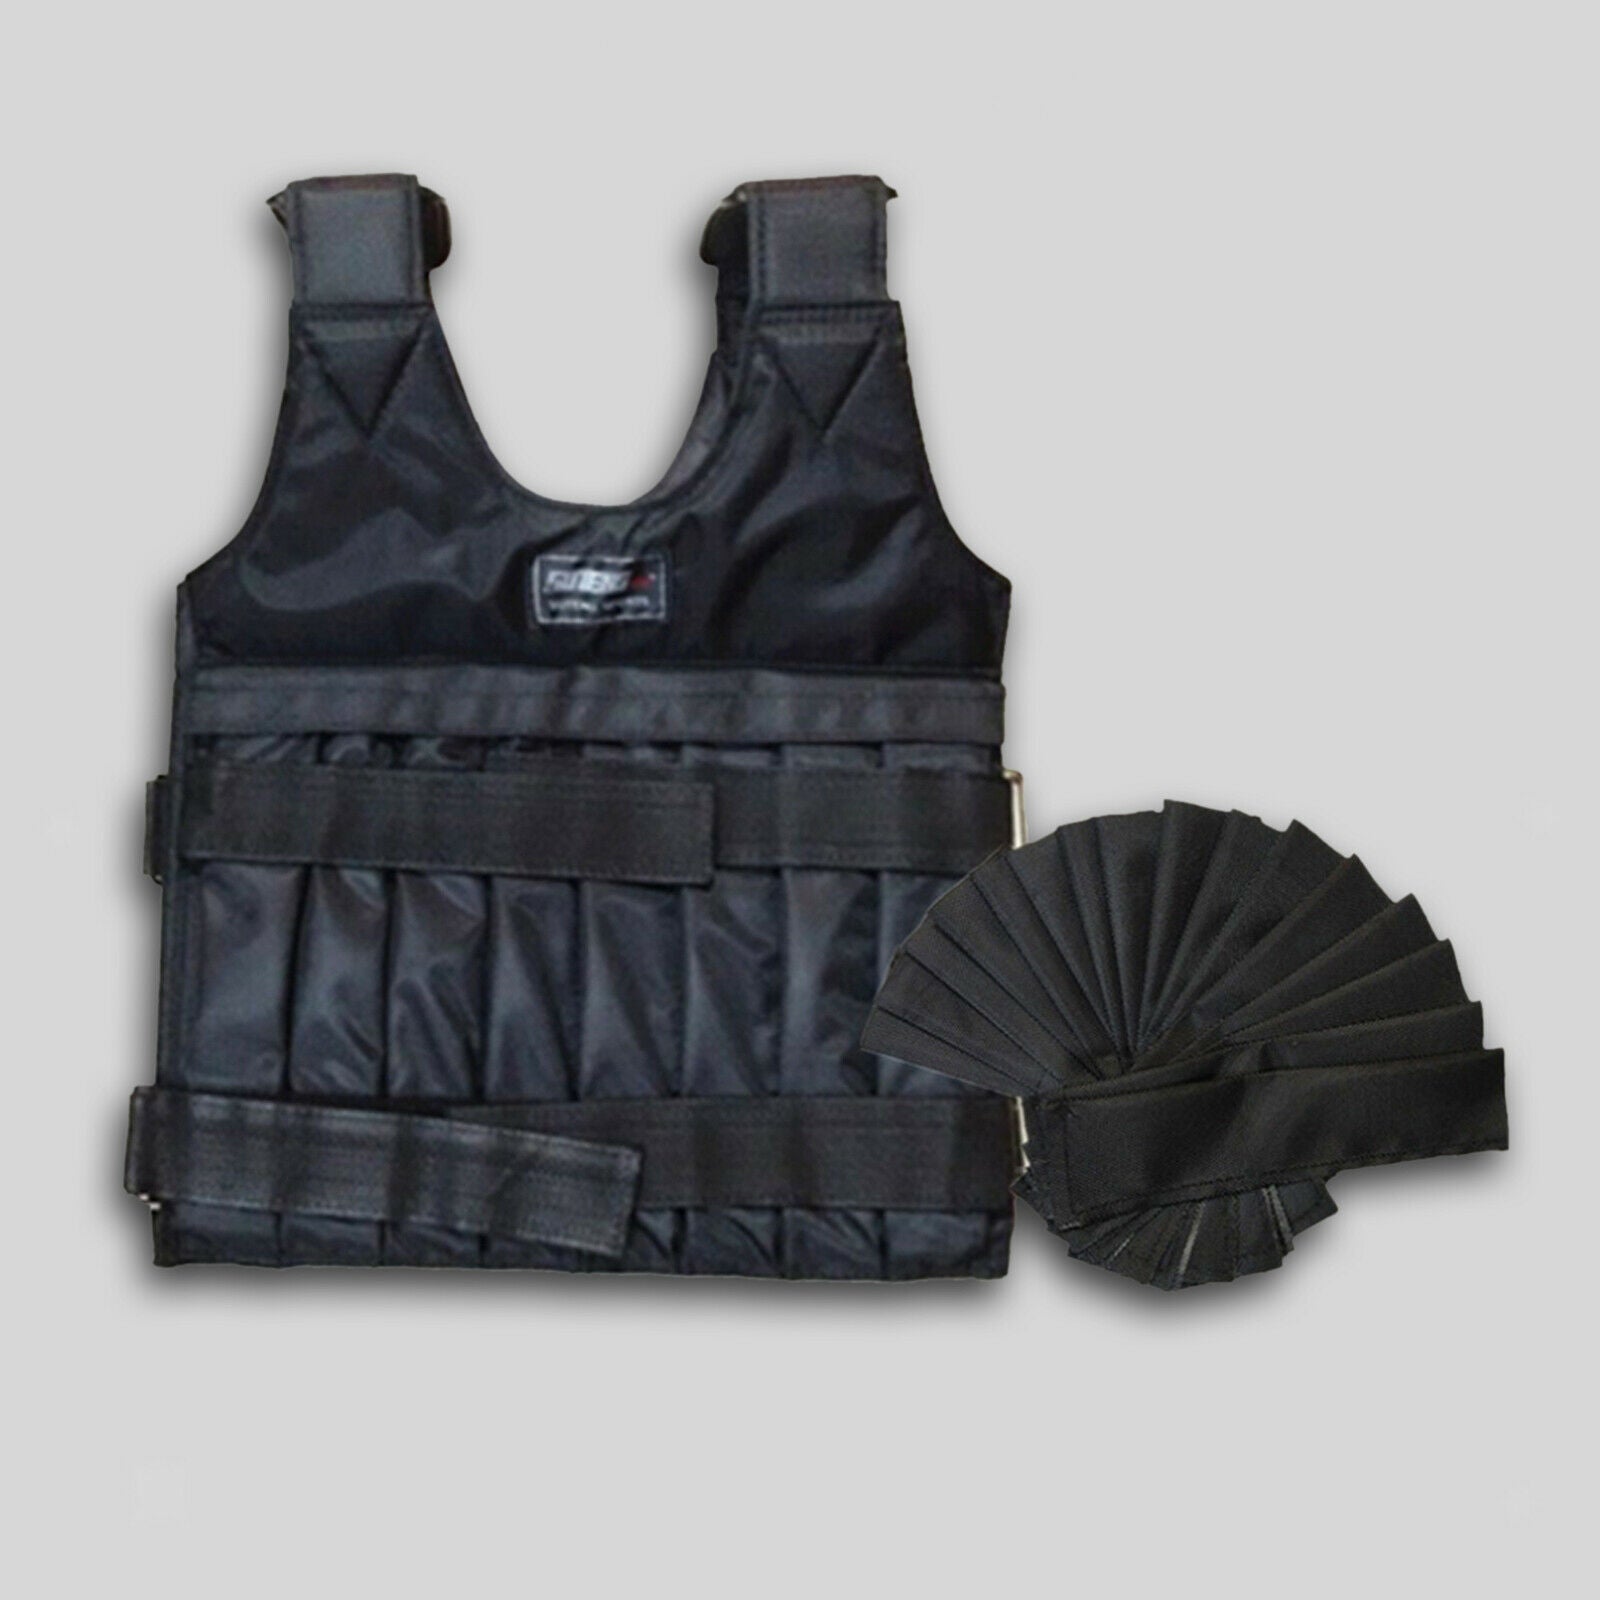 20kg Adjustable Weighted Workout Vest Fitness Training Empty Waistcoat Black